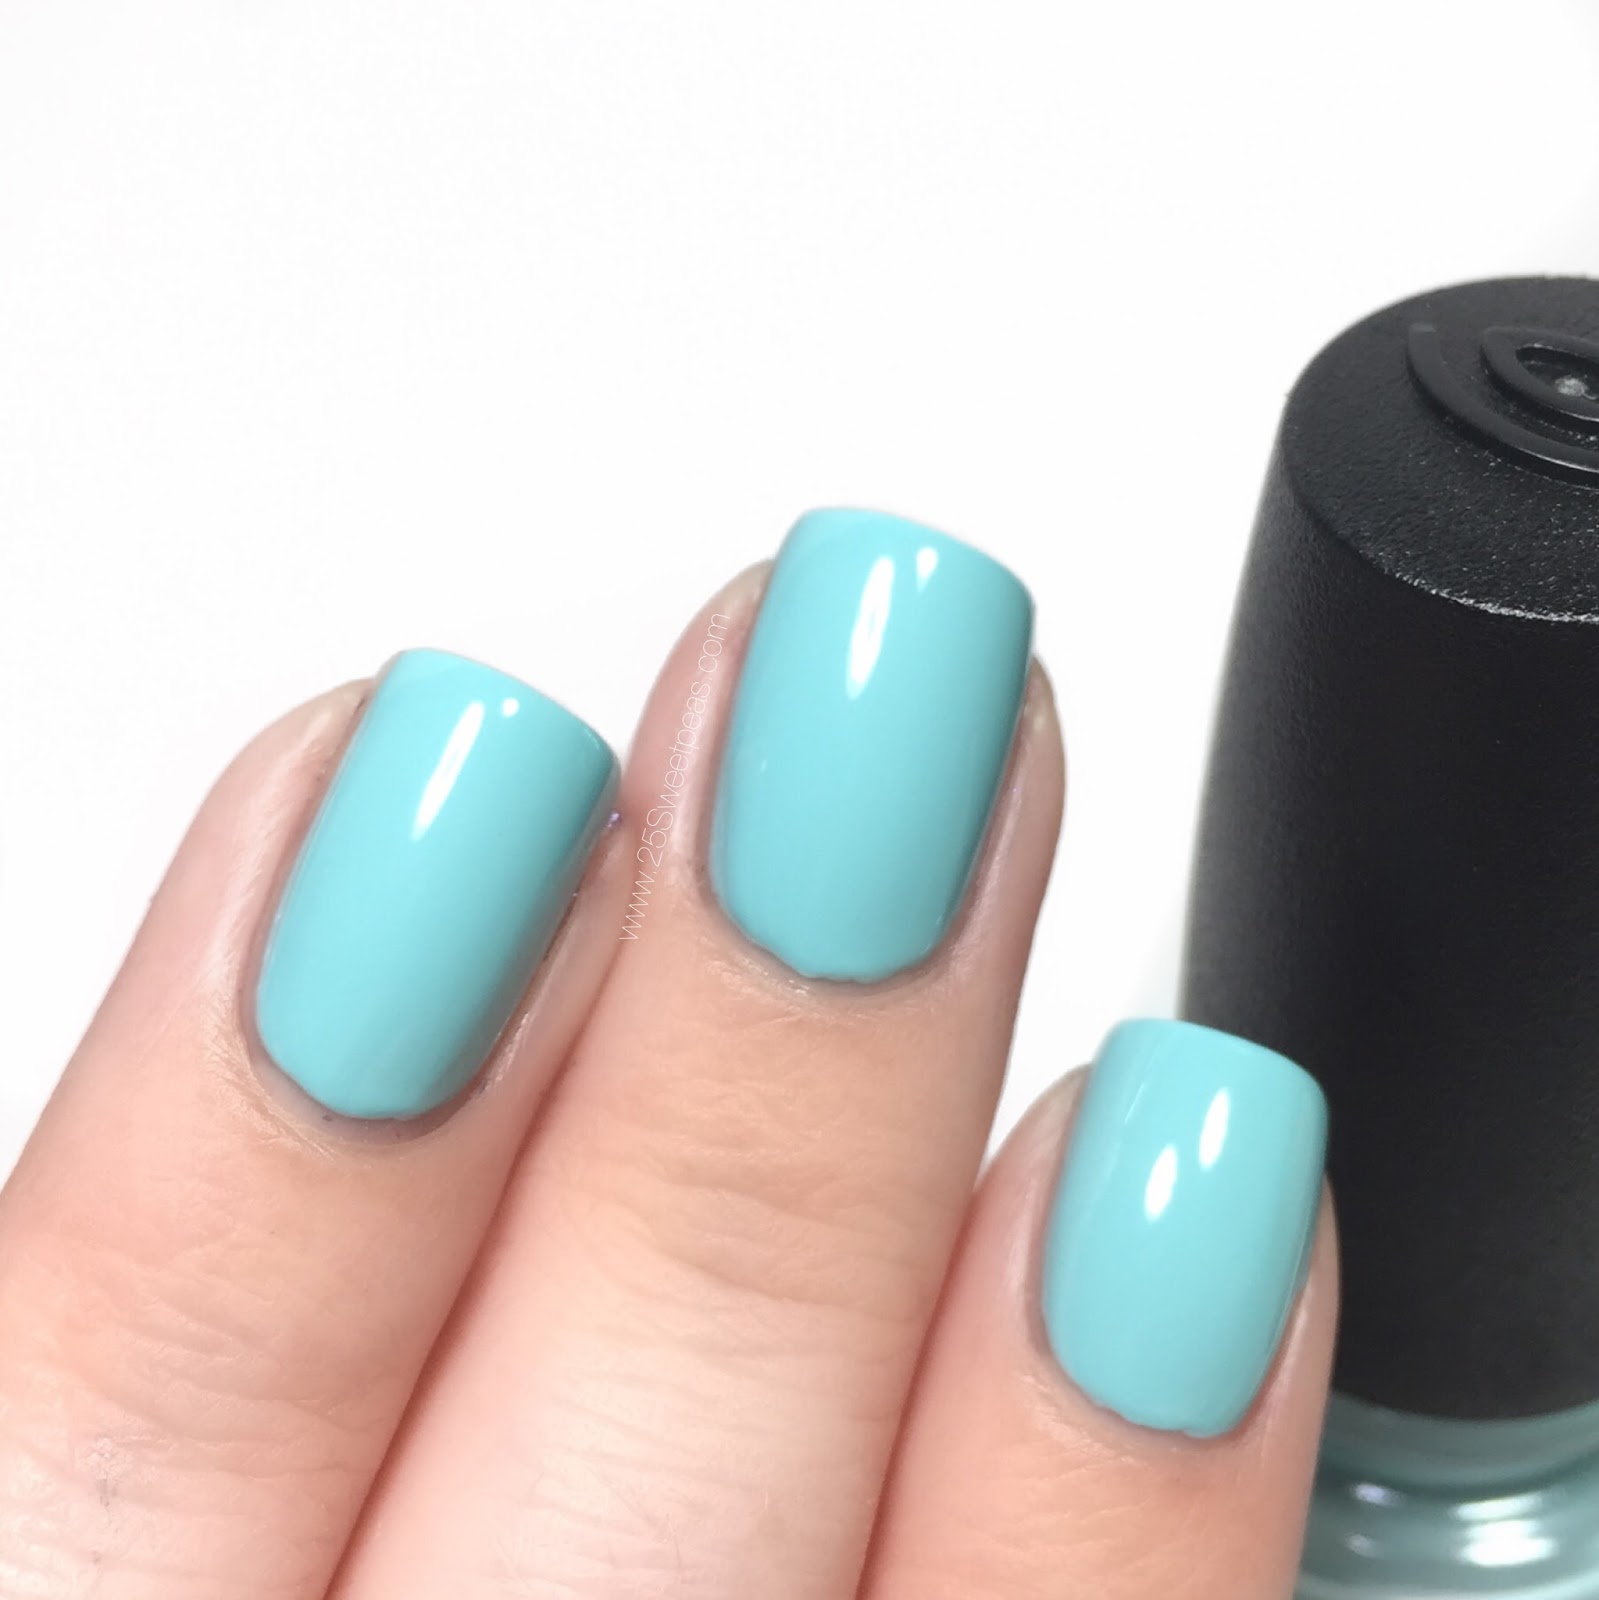 China Glaze At Your Athleisure